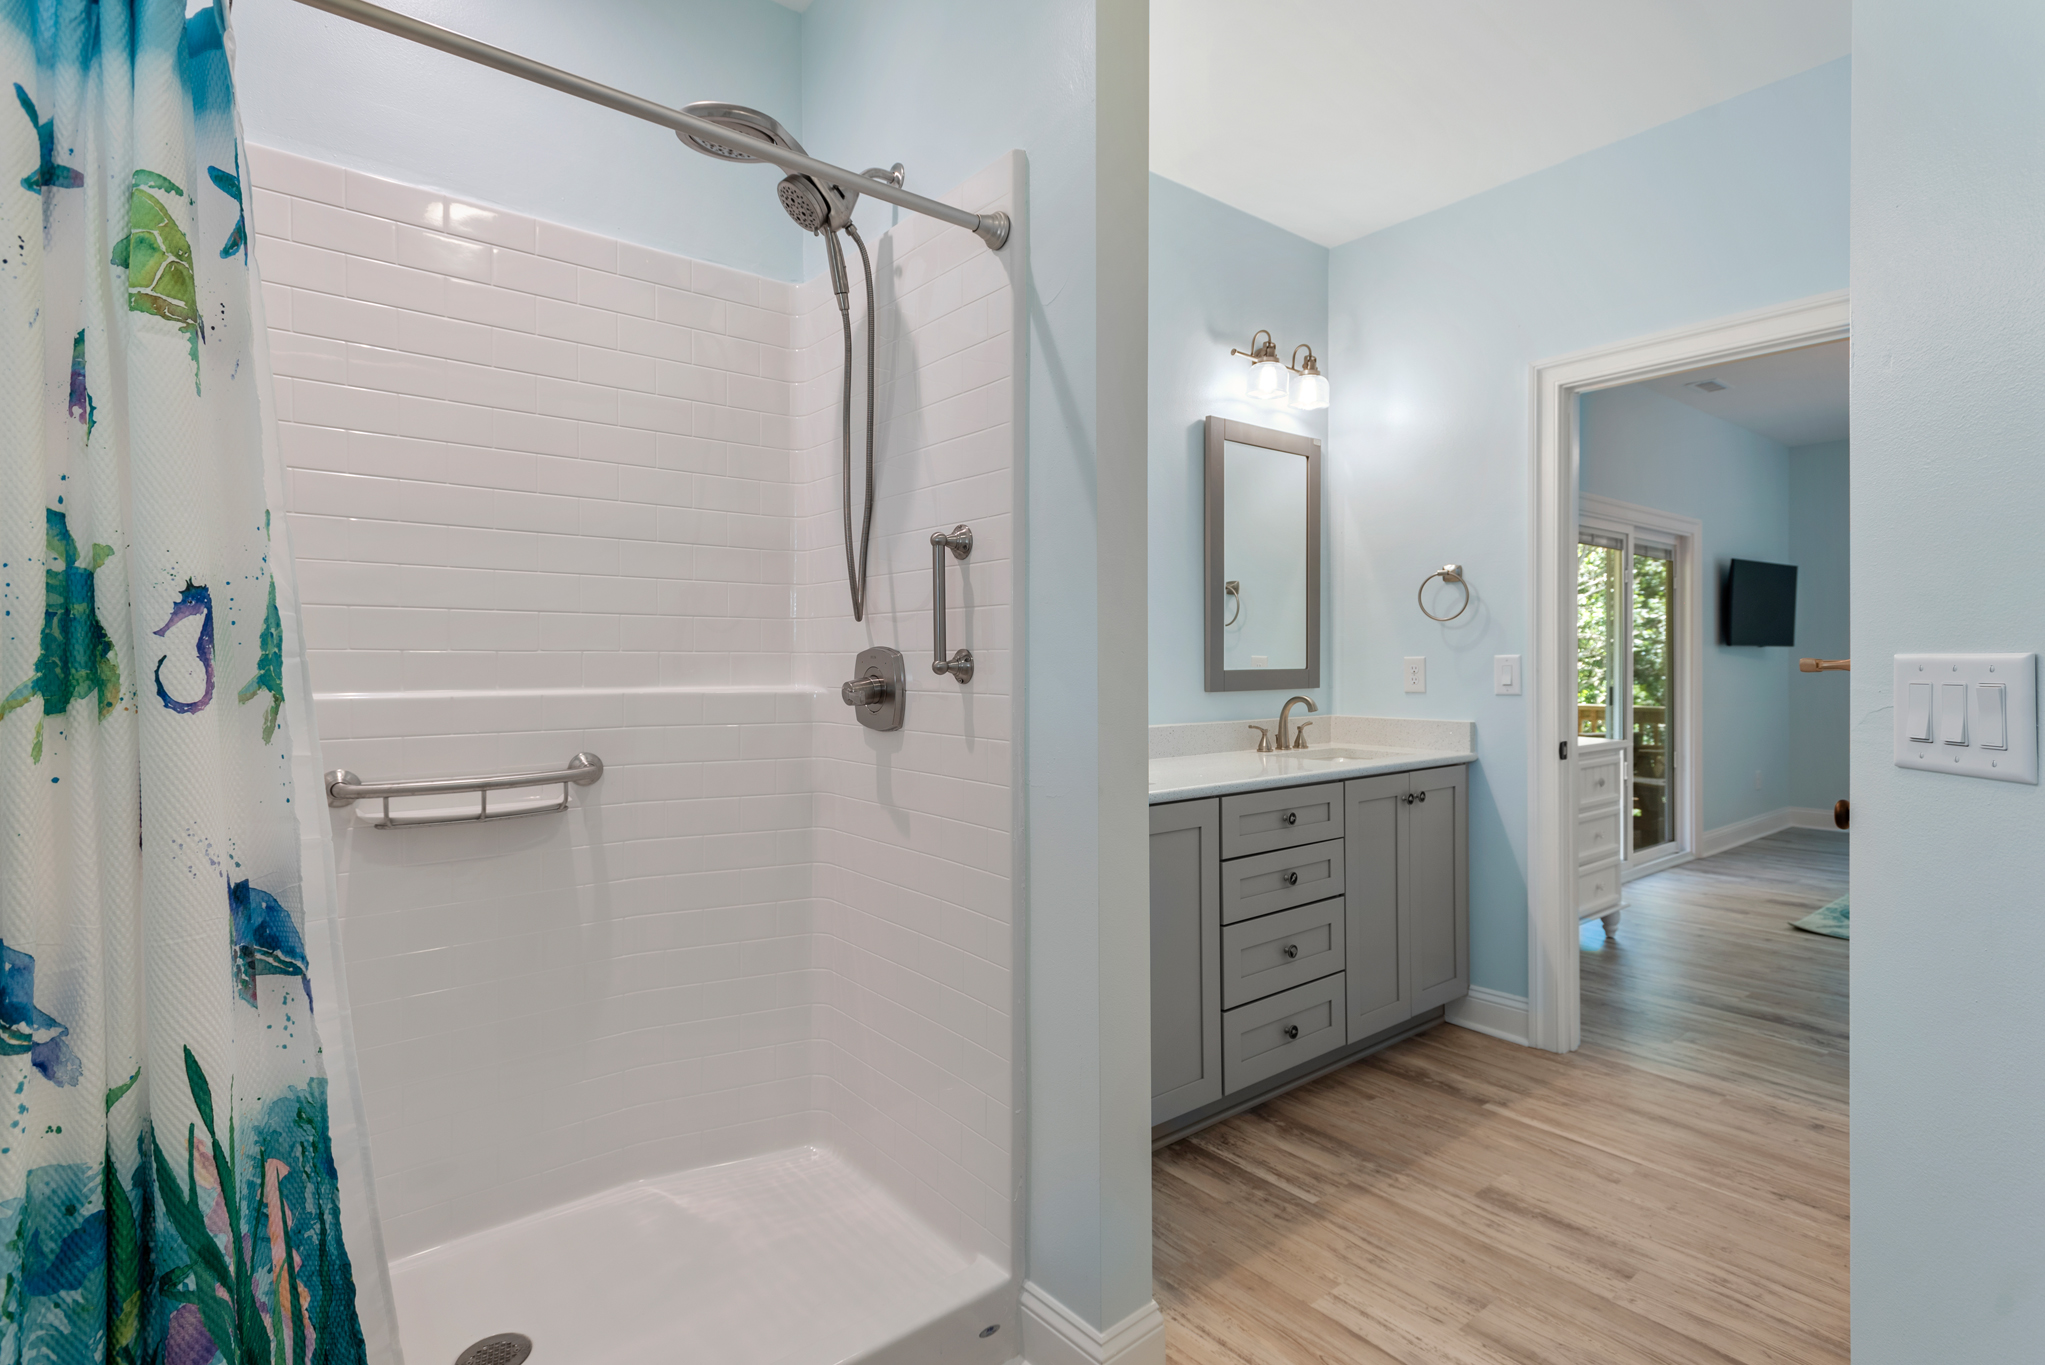 JR9706: Tranquility Cove | Top Level Bedroom 1 Private Bath